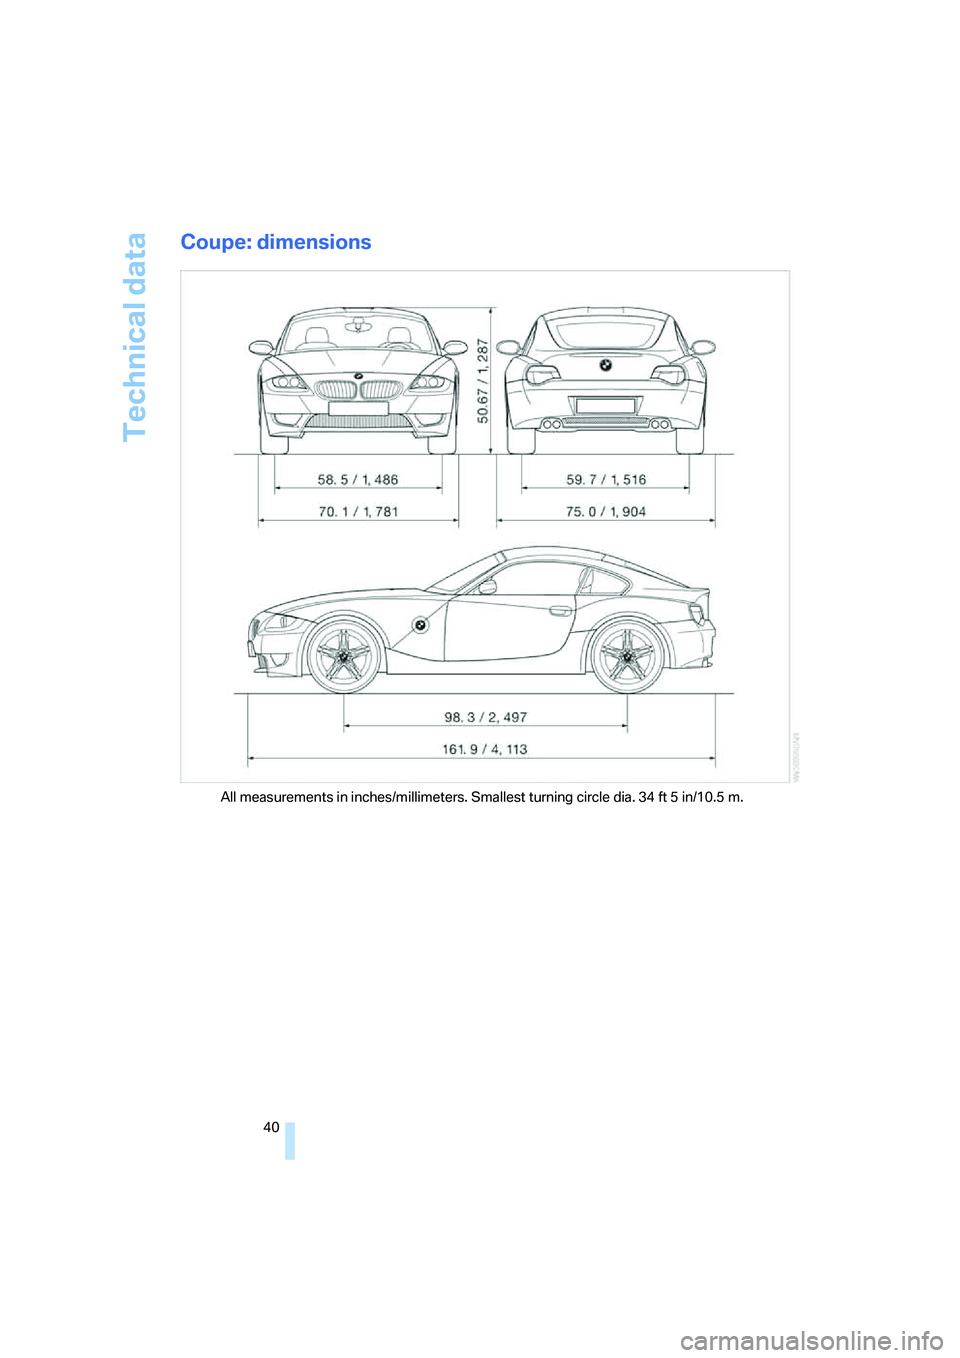 BMW Z4 M ROADSTER&COUPE 2007 Service Manual 
Technical data
40
Coupe: dimensions
All measurements in inches/millimeters. Smallest turning circle dia. 34 ft 5 in/10.5 m. 